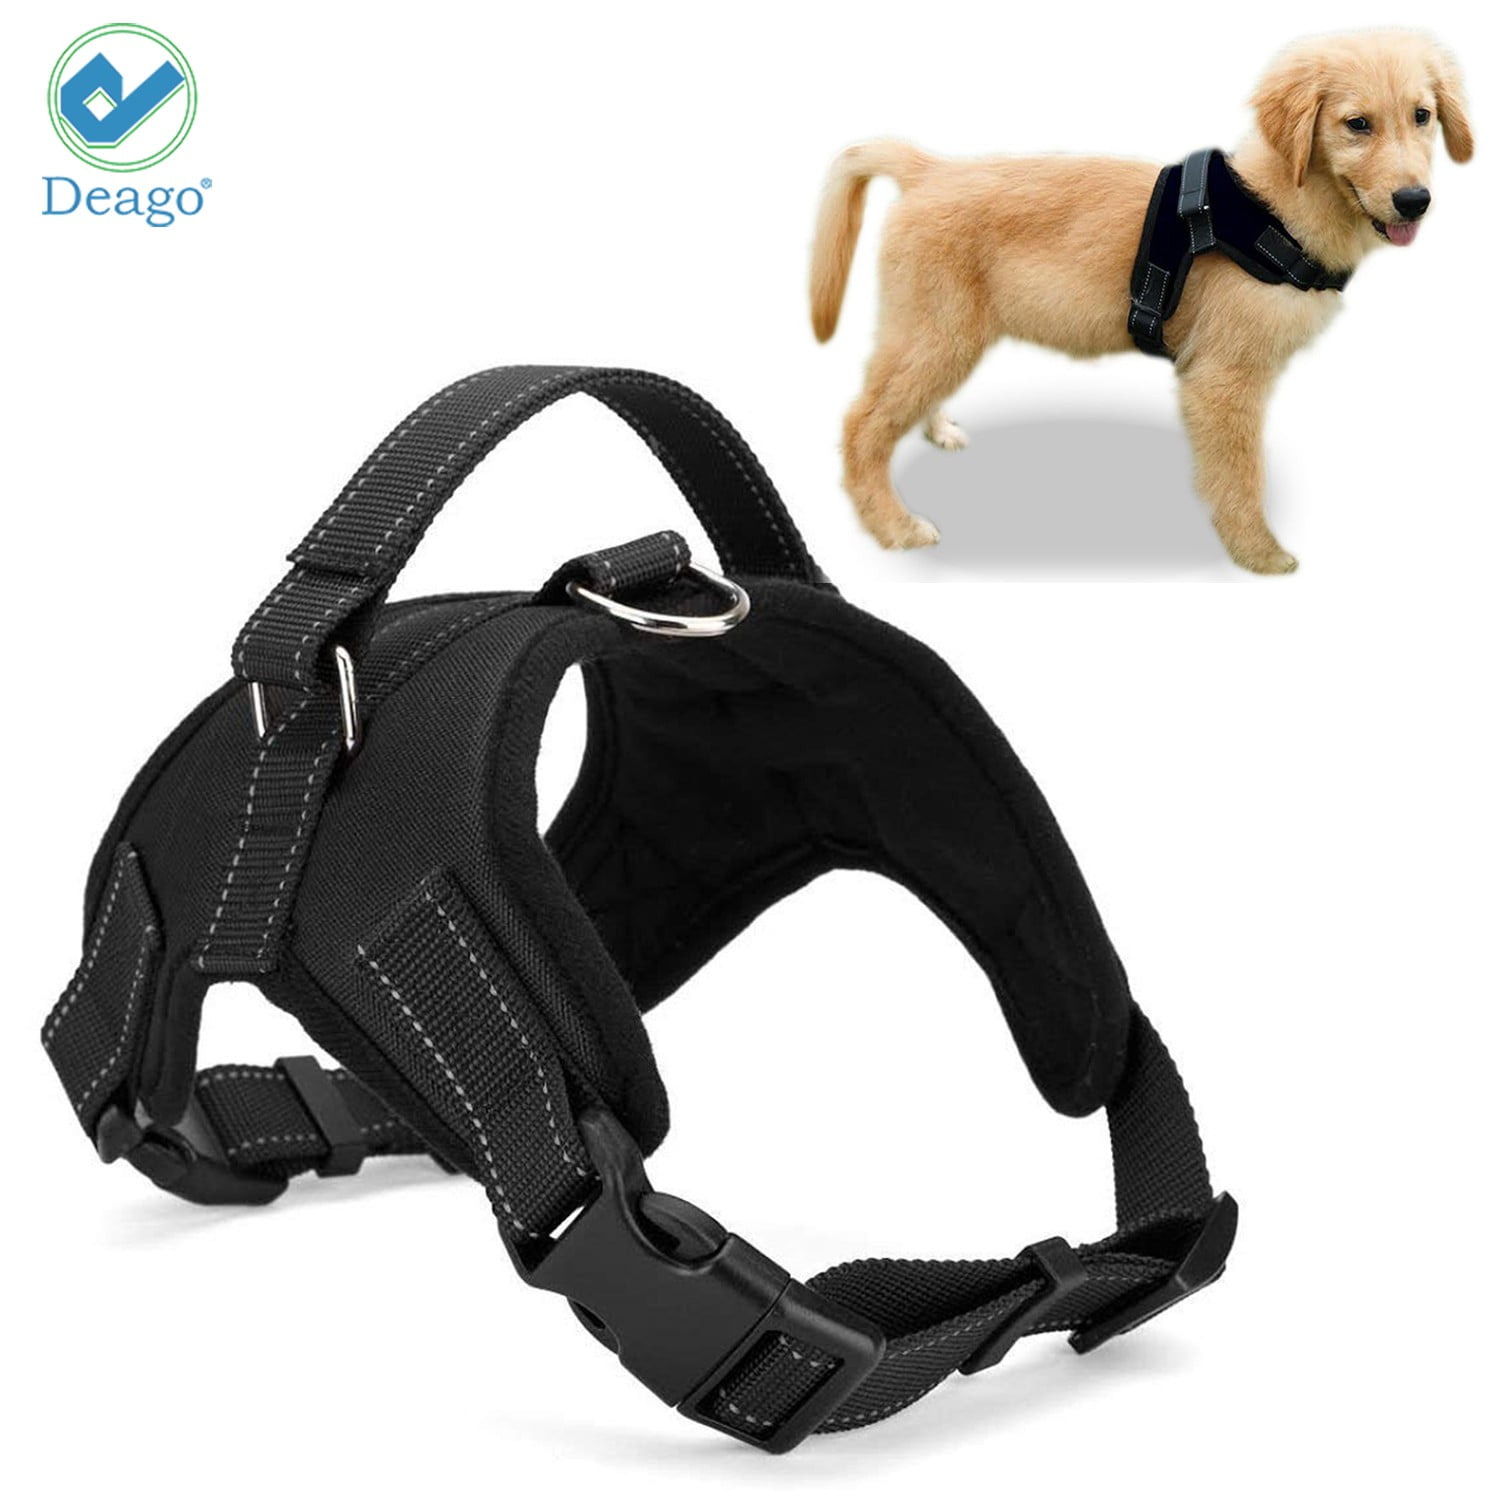 MerryBIY No Pull Dog Harness Reflective Adjustable Vest with Handle& Front and Back Lead Attachments Padded Puppy Pet Outdoor Chest Harness for Small Medium Large Dogs Training Walking Dog Harness